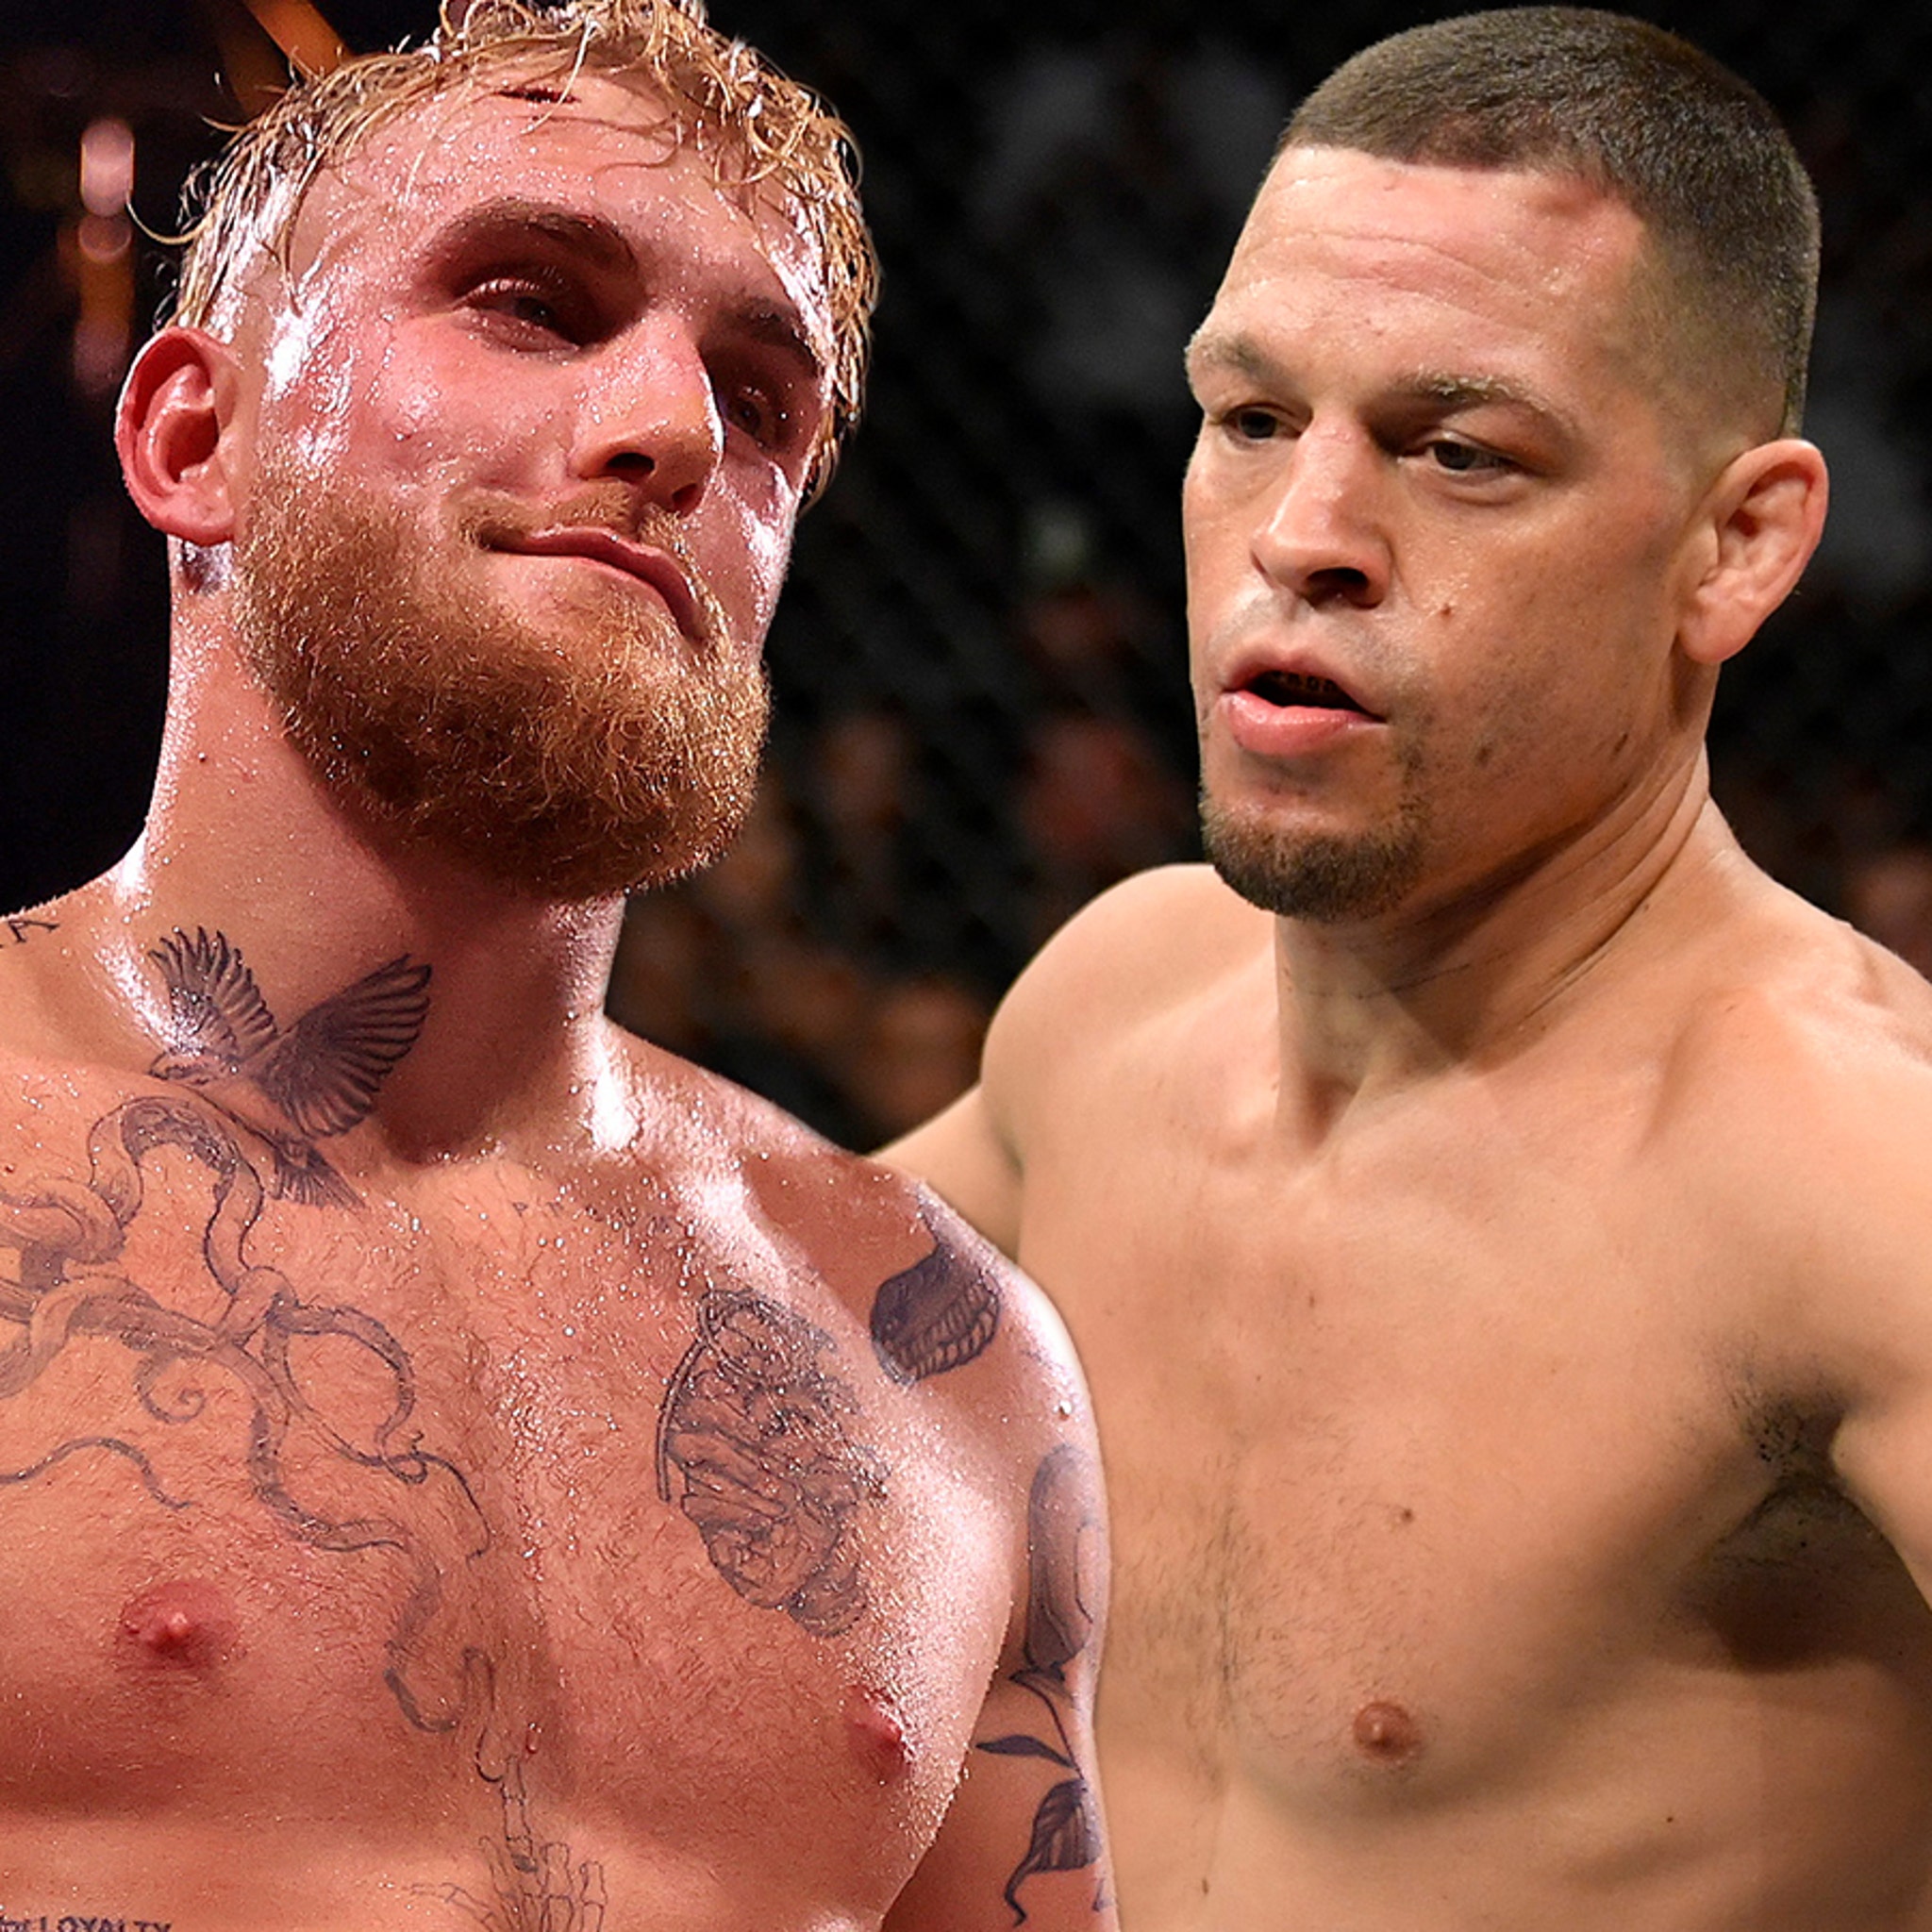 Nate Diaz 'hurt' after Jerry Rice betrayed him for Conor McGregor | Fox News